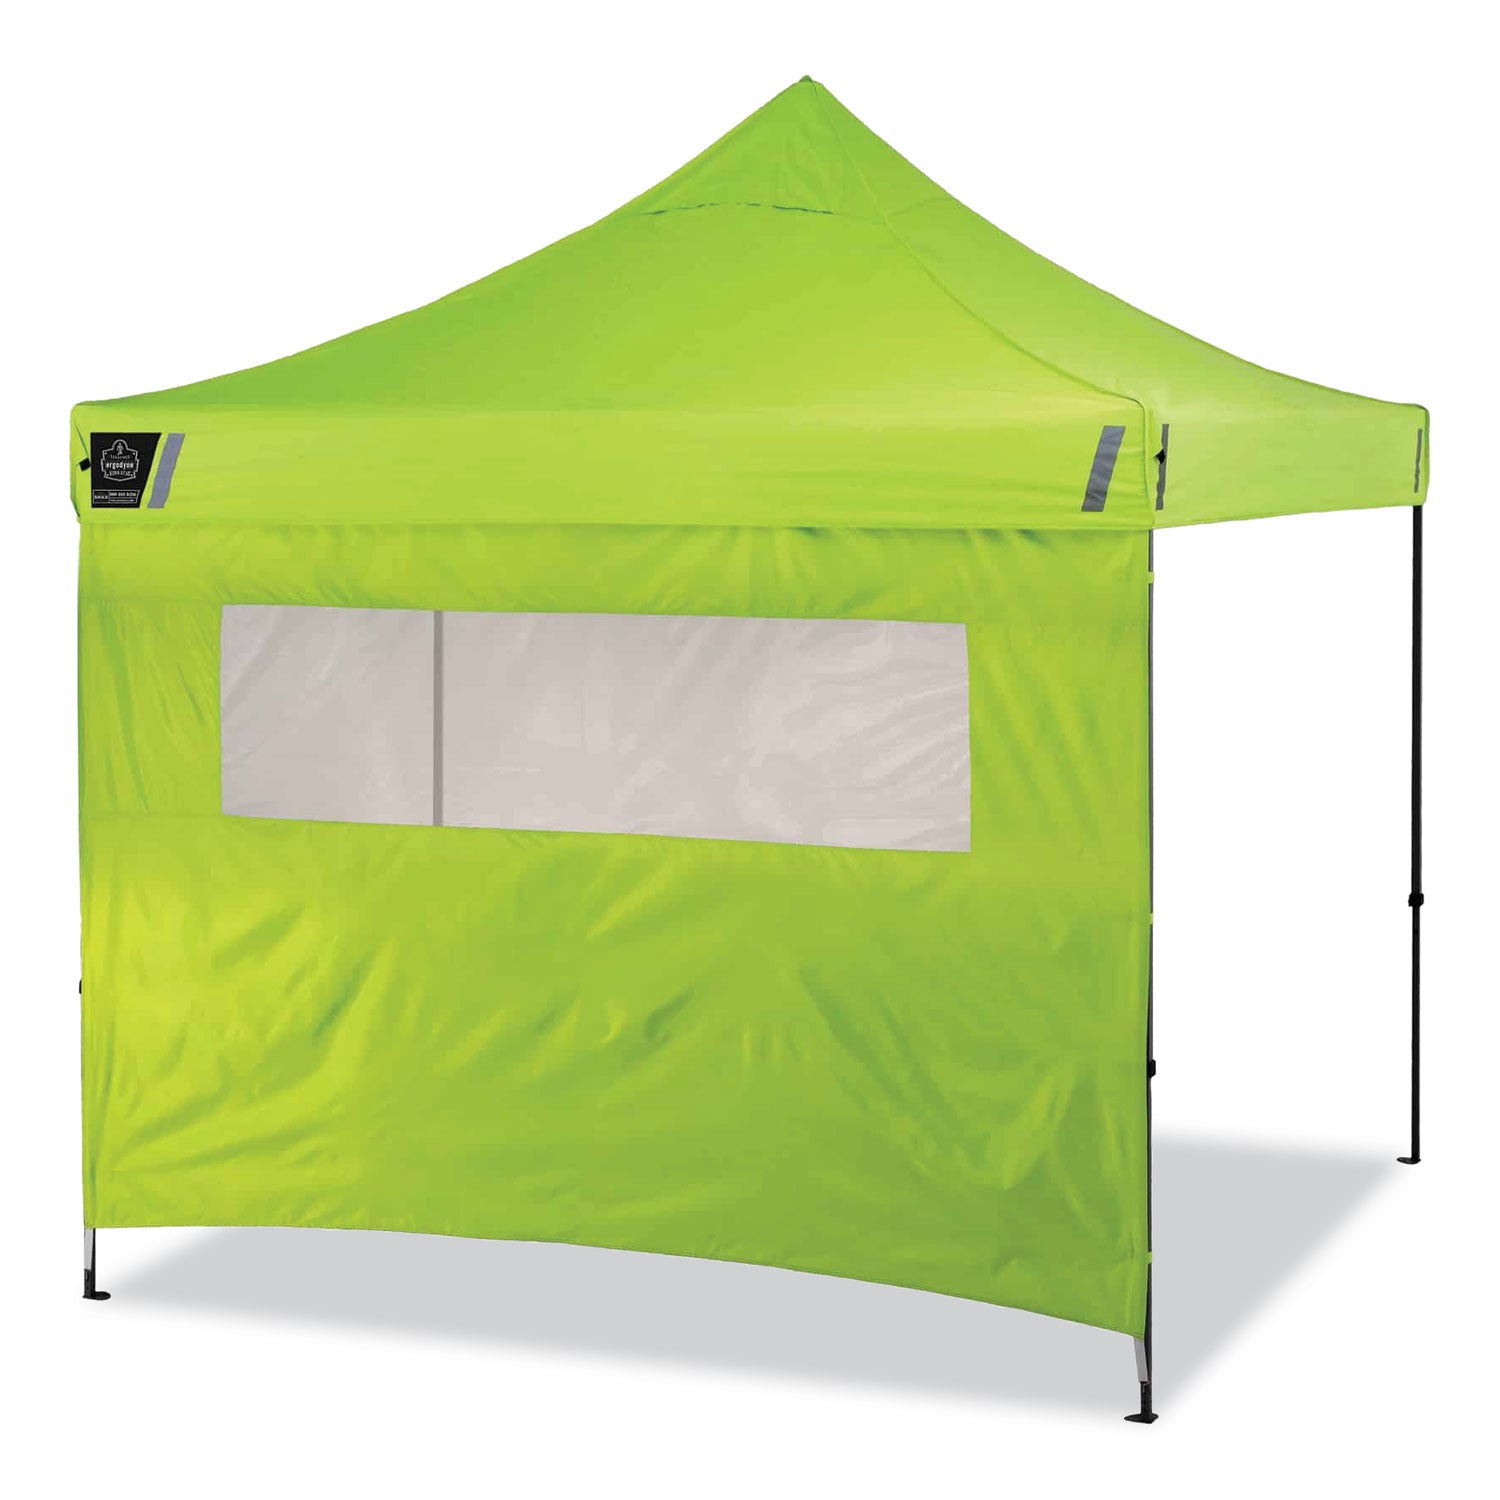 shax-6052-heavy-duty-tent-kit-+-mesh-windows-single-skin-10-ft-x-10-ft-polyester-steel-lime-ships-in-1-3-business-days_ego12983 - 7